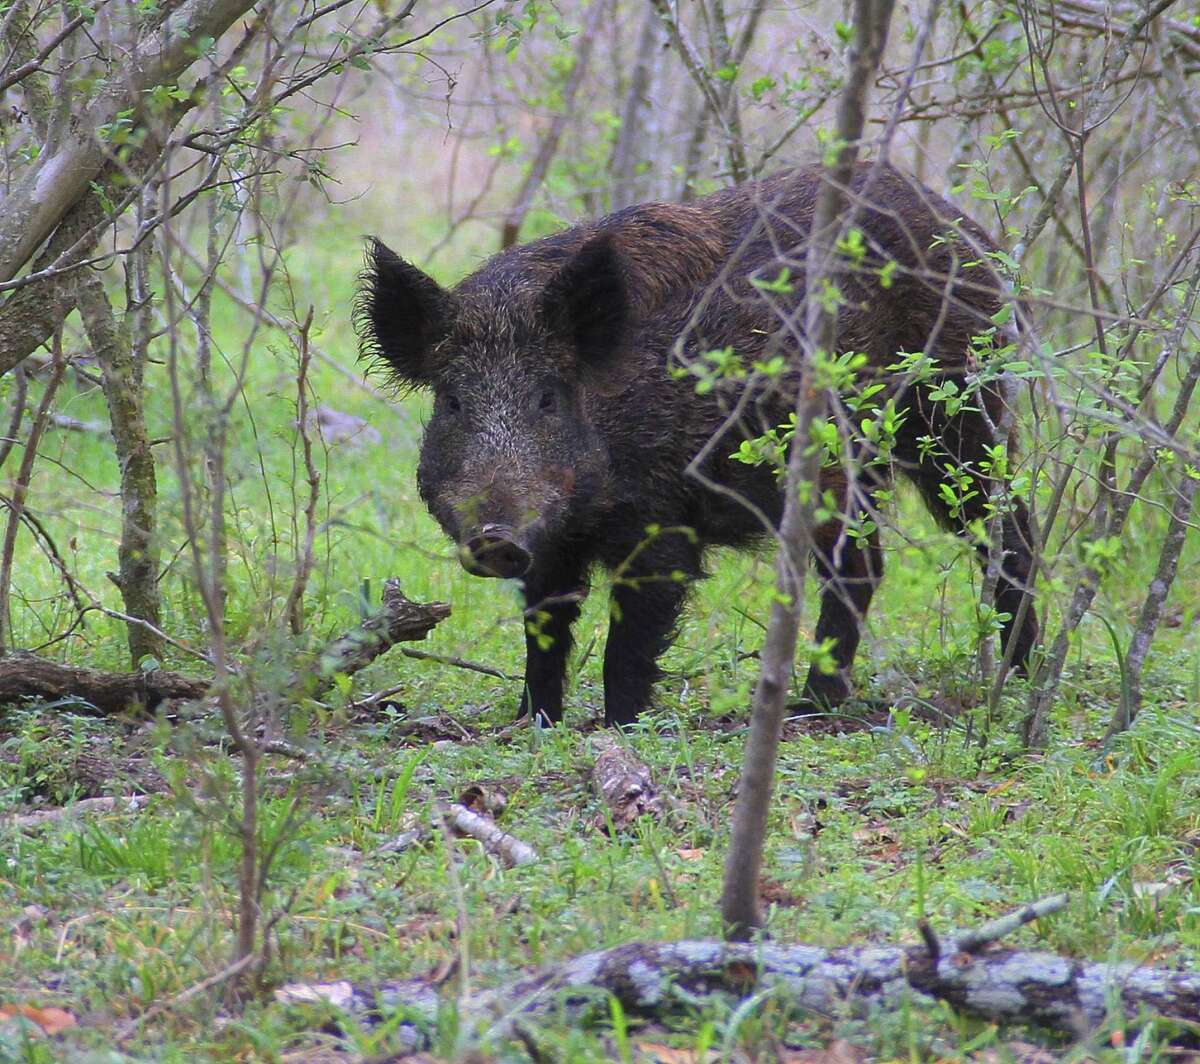 Feral hogs such as this one are a growing menace in many parts of Texas.